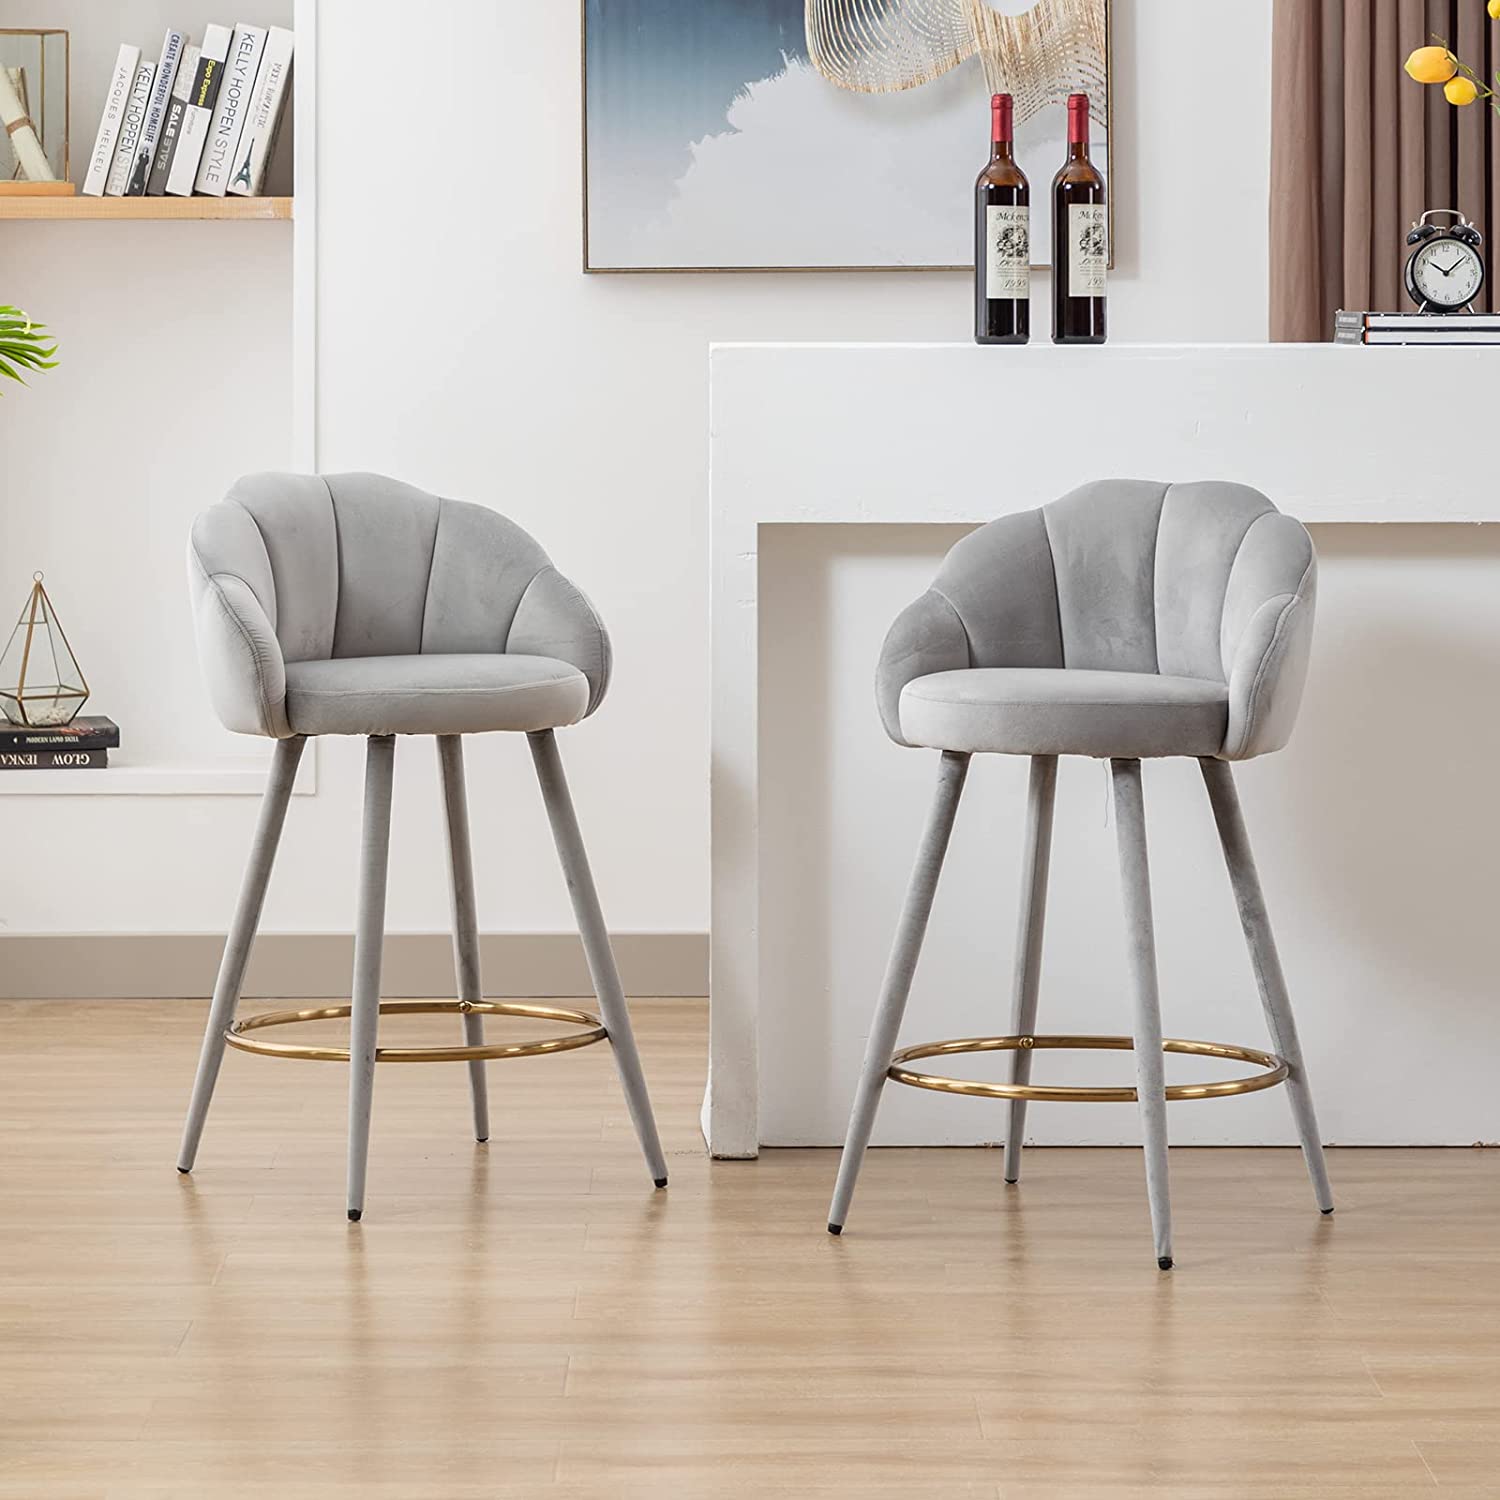 light grey upholstered bar stools with tufted backrest channel tufting glamorous seating ideas for eat in kitchen counter height dining space design inspiration